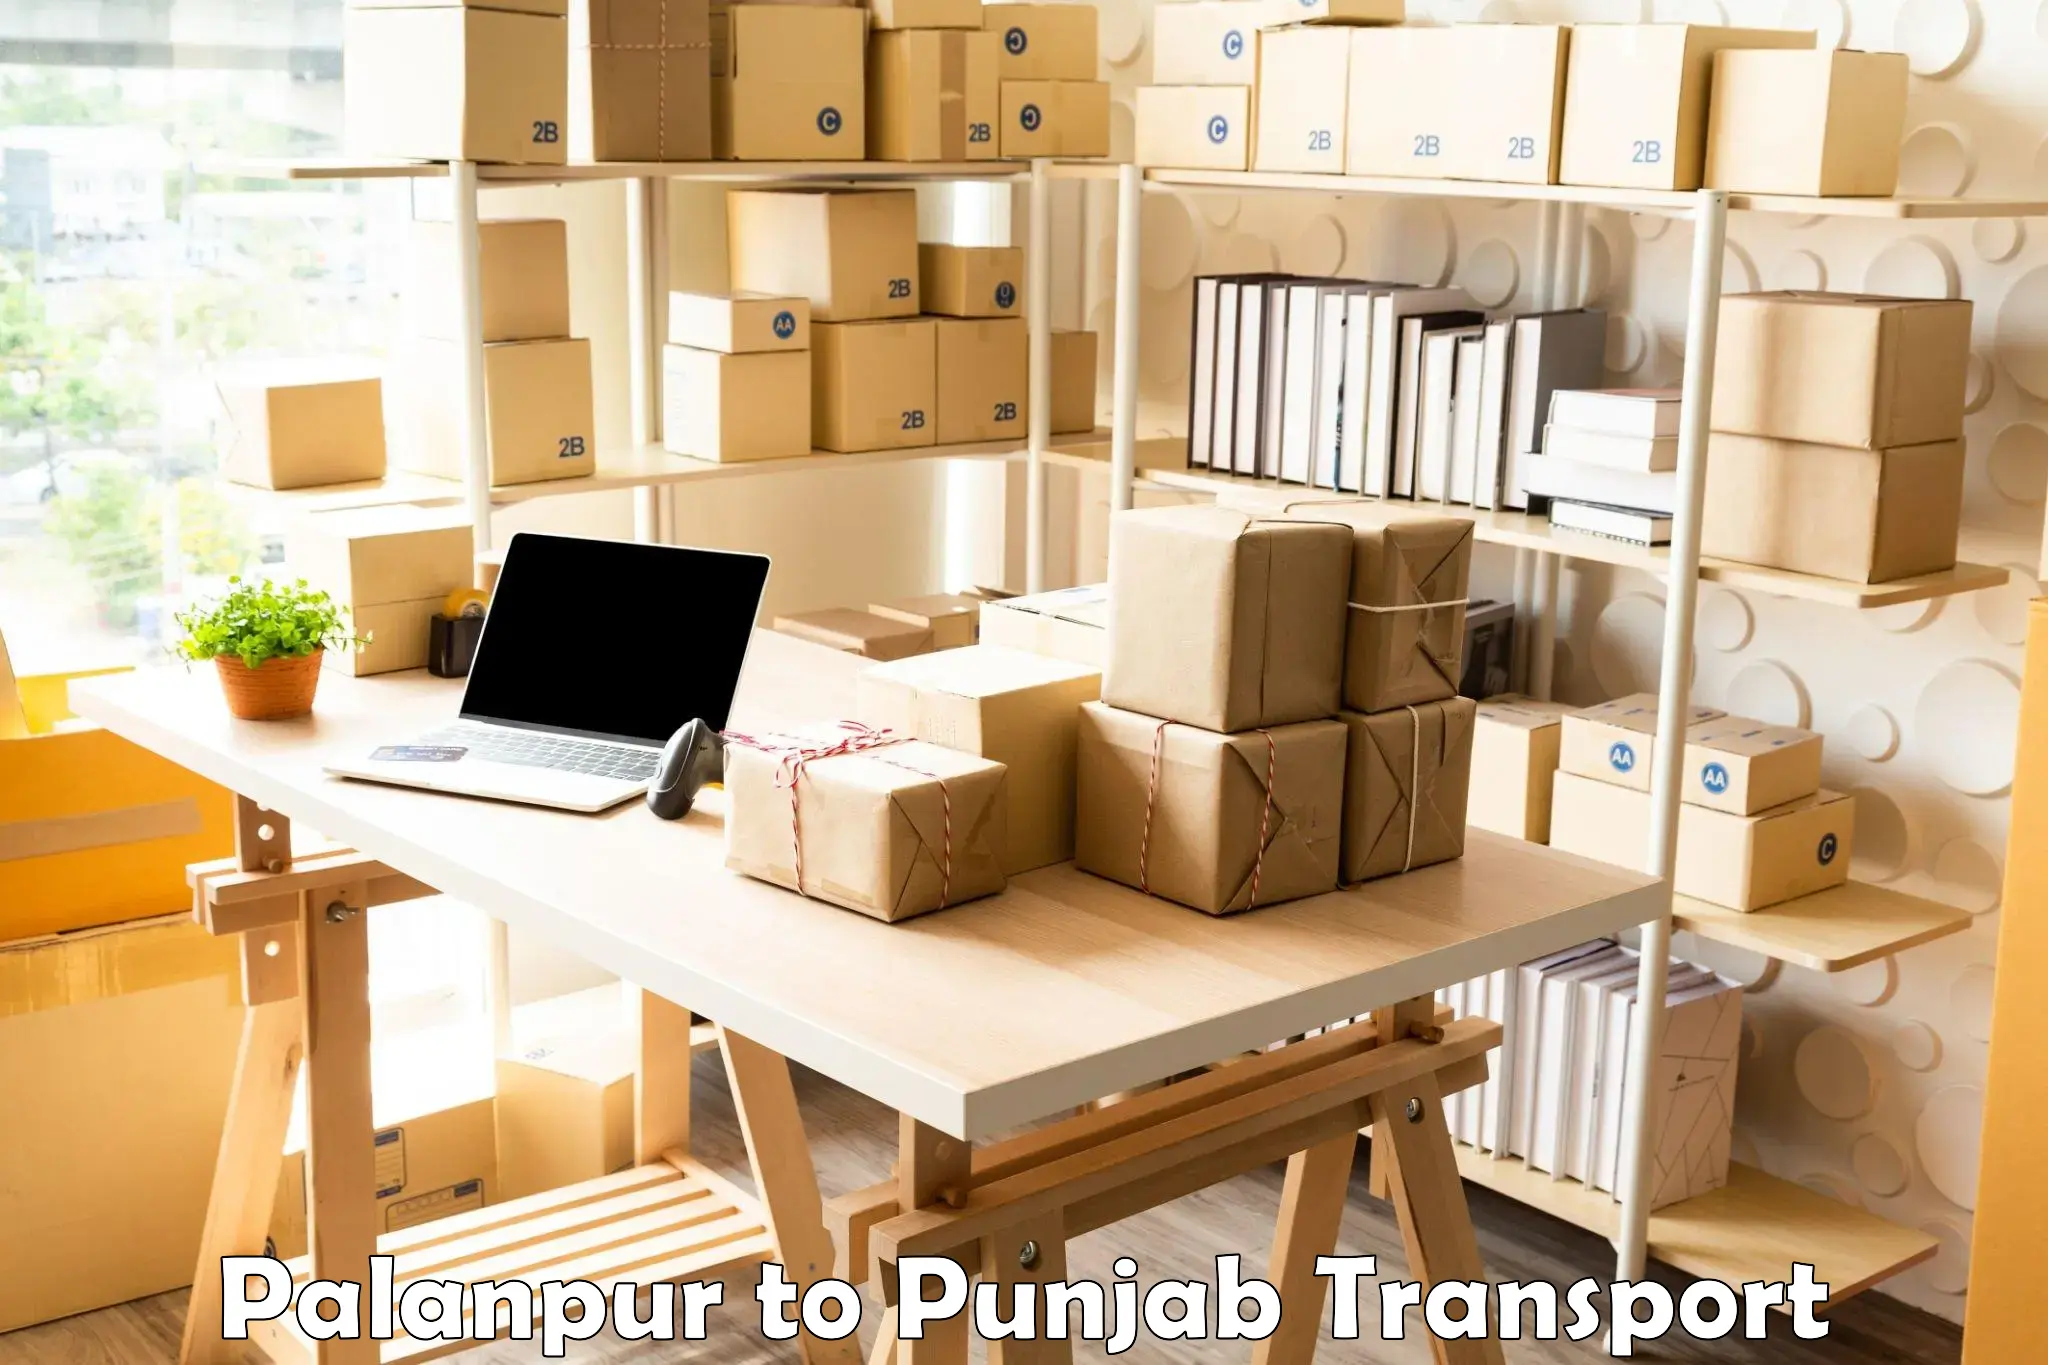 Truck transport companies in India Palanpur to Samana